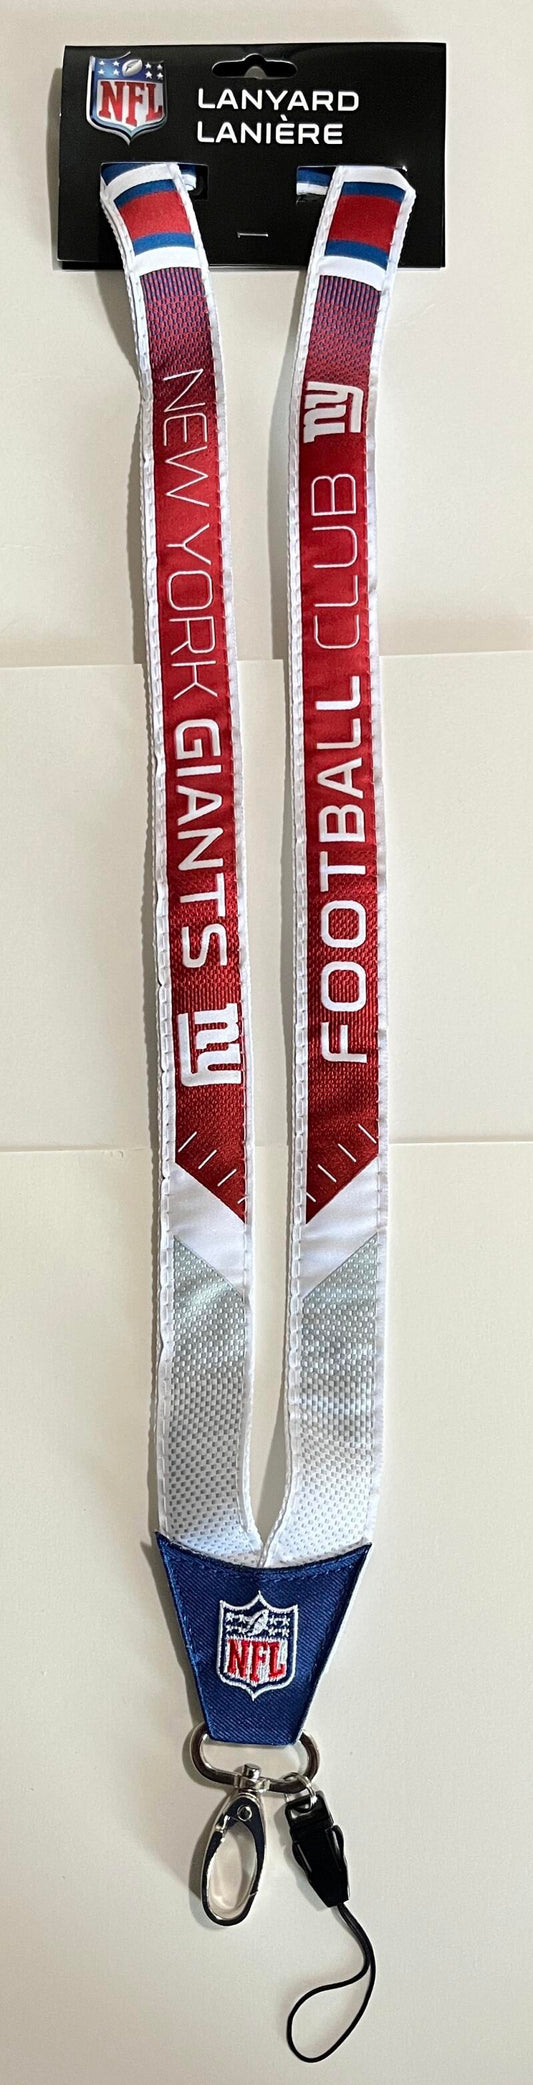 New York Giants Woven Licensed NFL Football Lanyard Metal Clasp Image 1